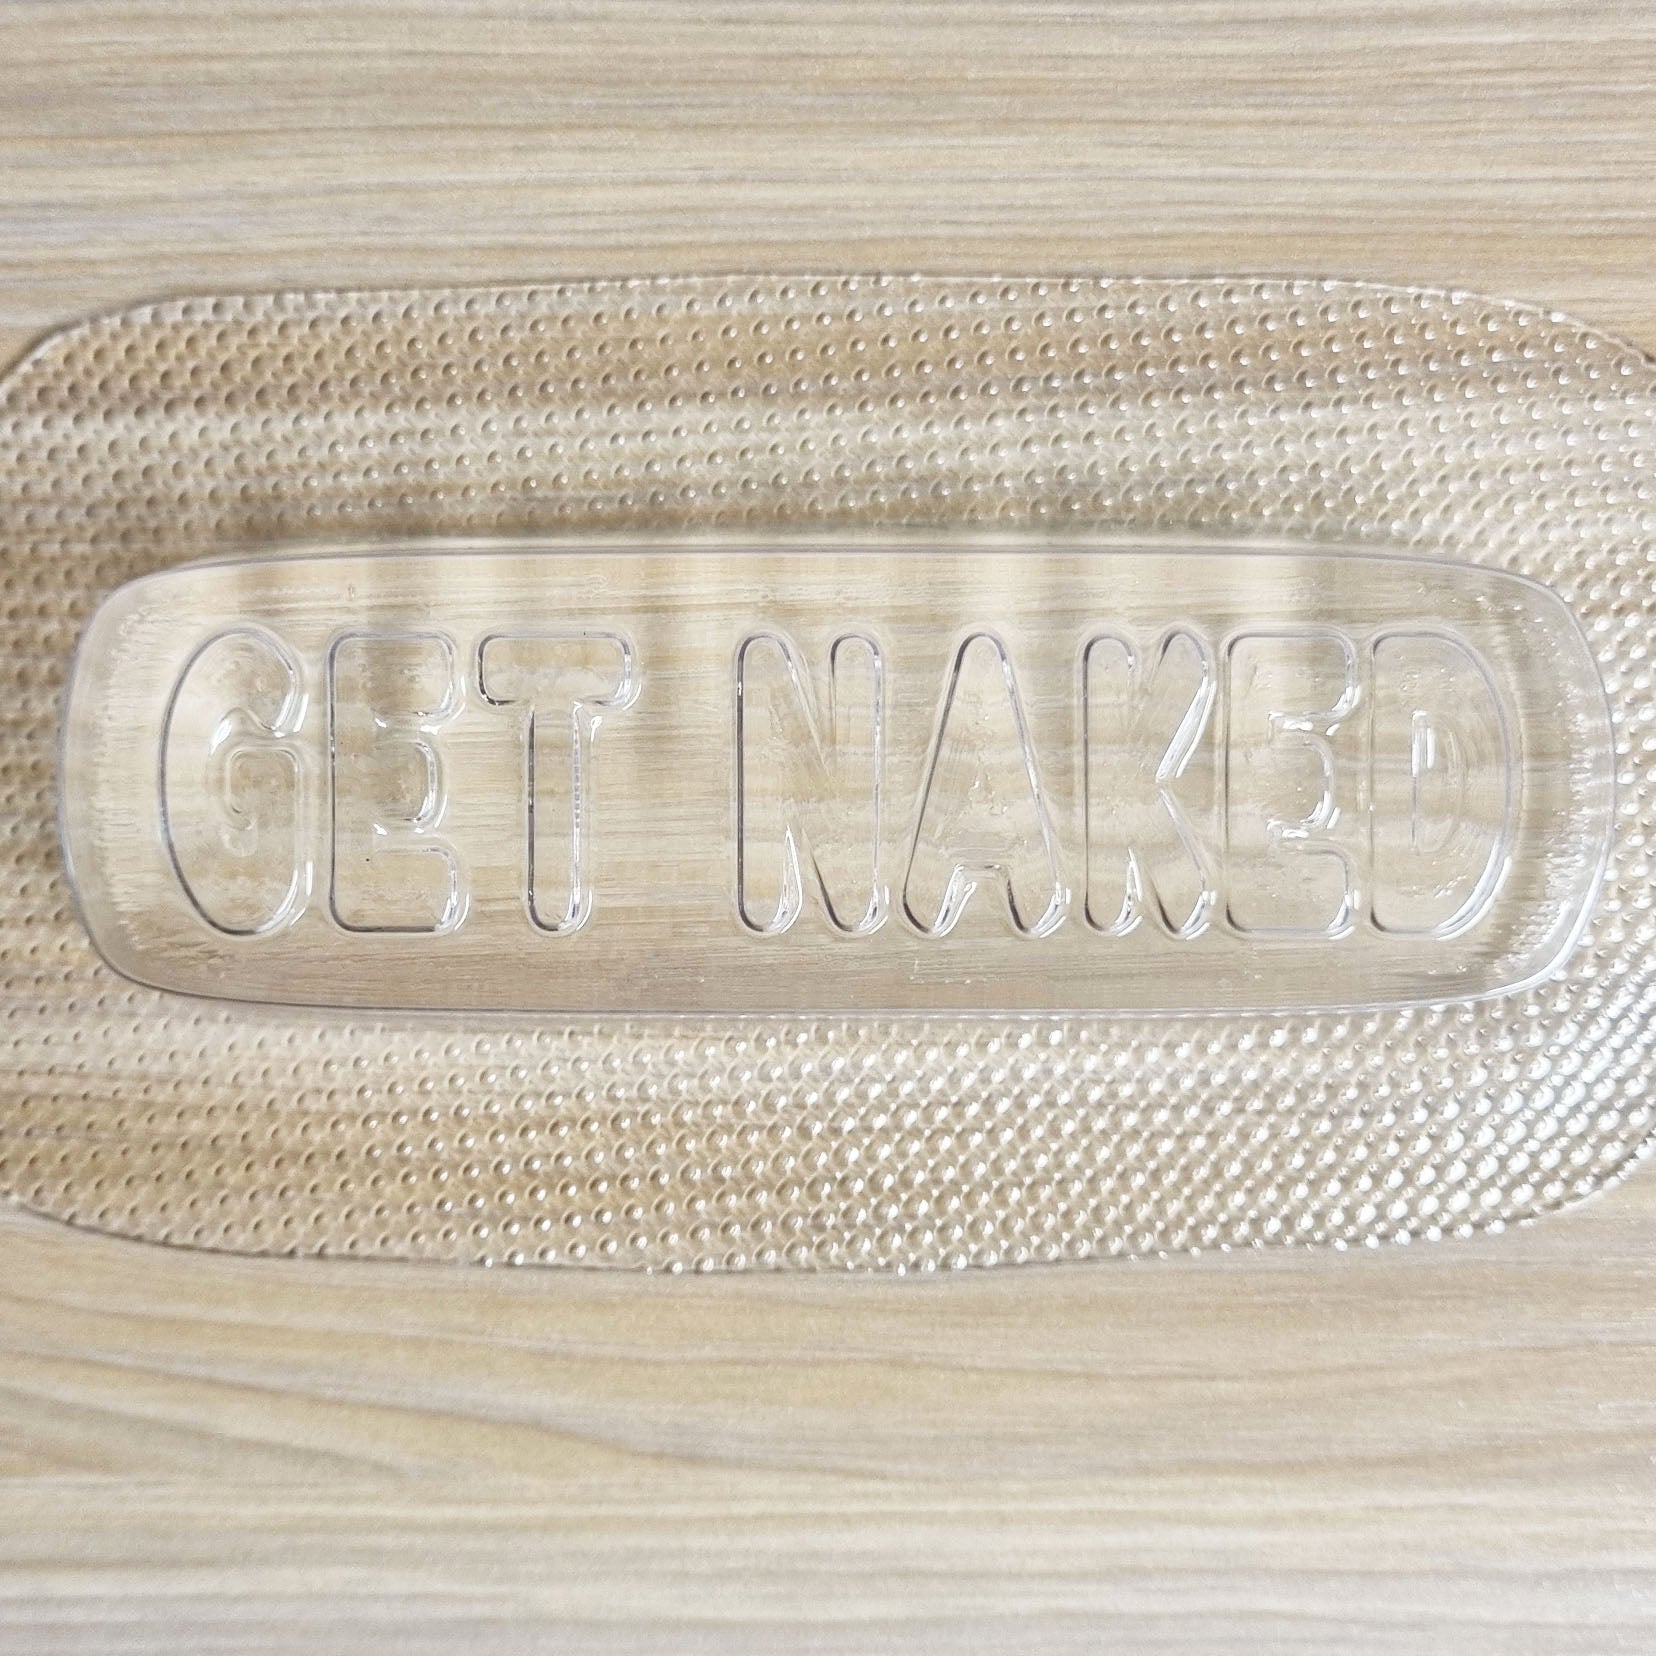 Get Naked Mould | Truly Personal | Bath Bomb, Soap, Resin, Chocolate, Jelly, Wax Melts Mold